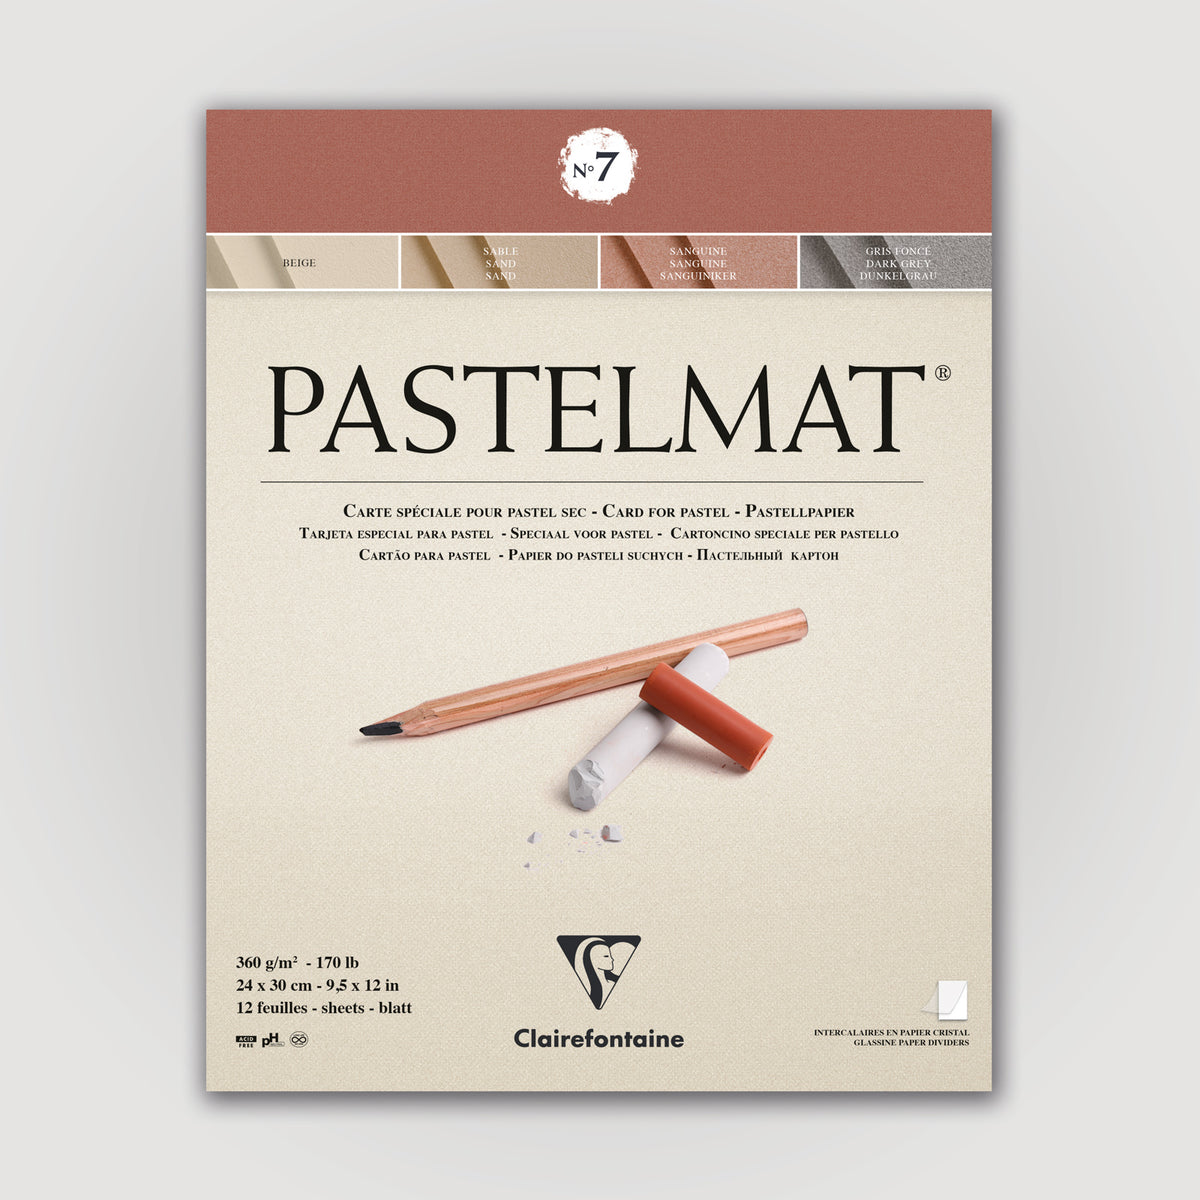 Clairefontaine Pastelmat N°7 360g 24x30 12 sheets